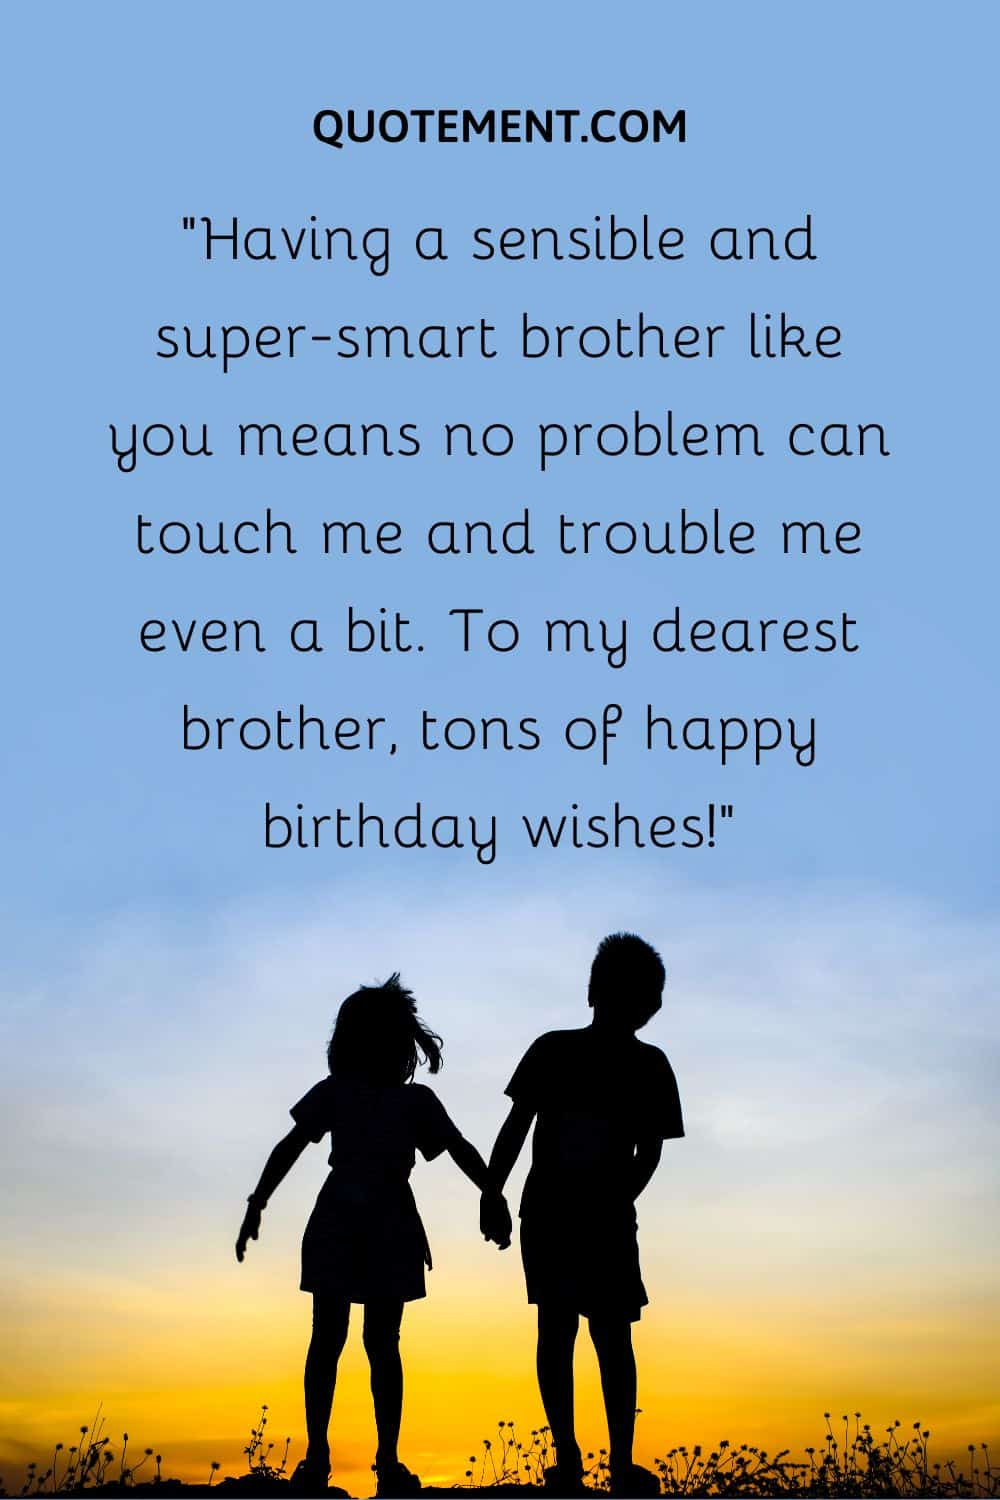 “Having a sensible and super-smart brother like you means no problem can touch me and trouble me even a bit. To my dearest brother, tons of happy birthday wishes!”